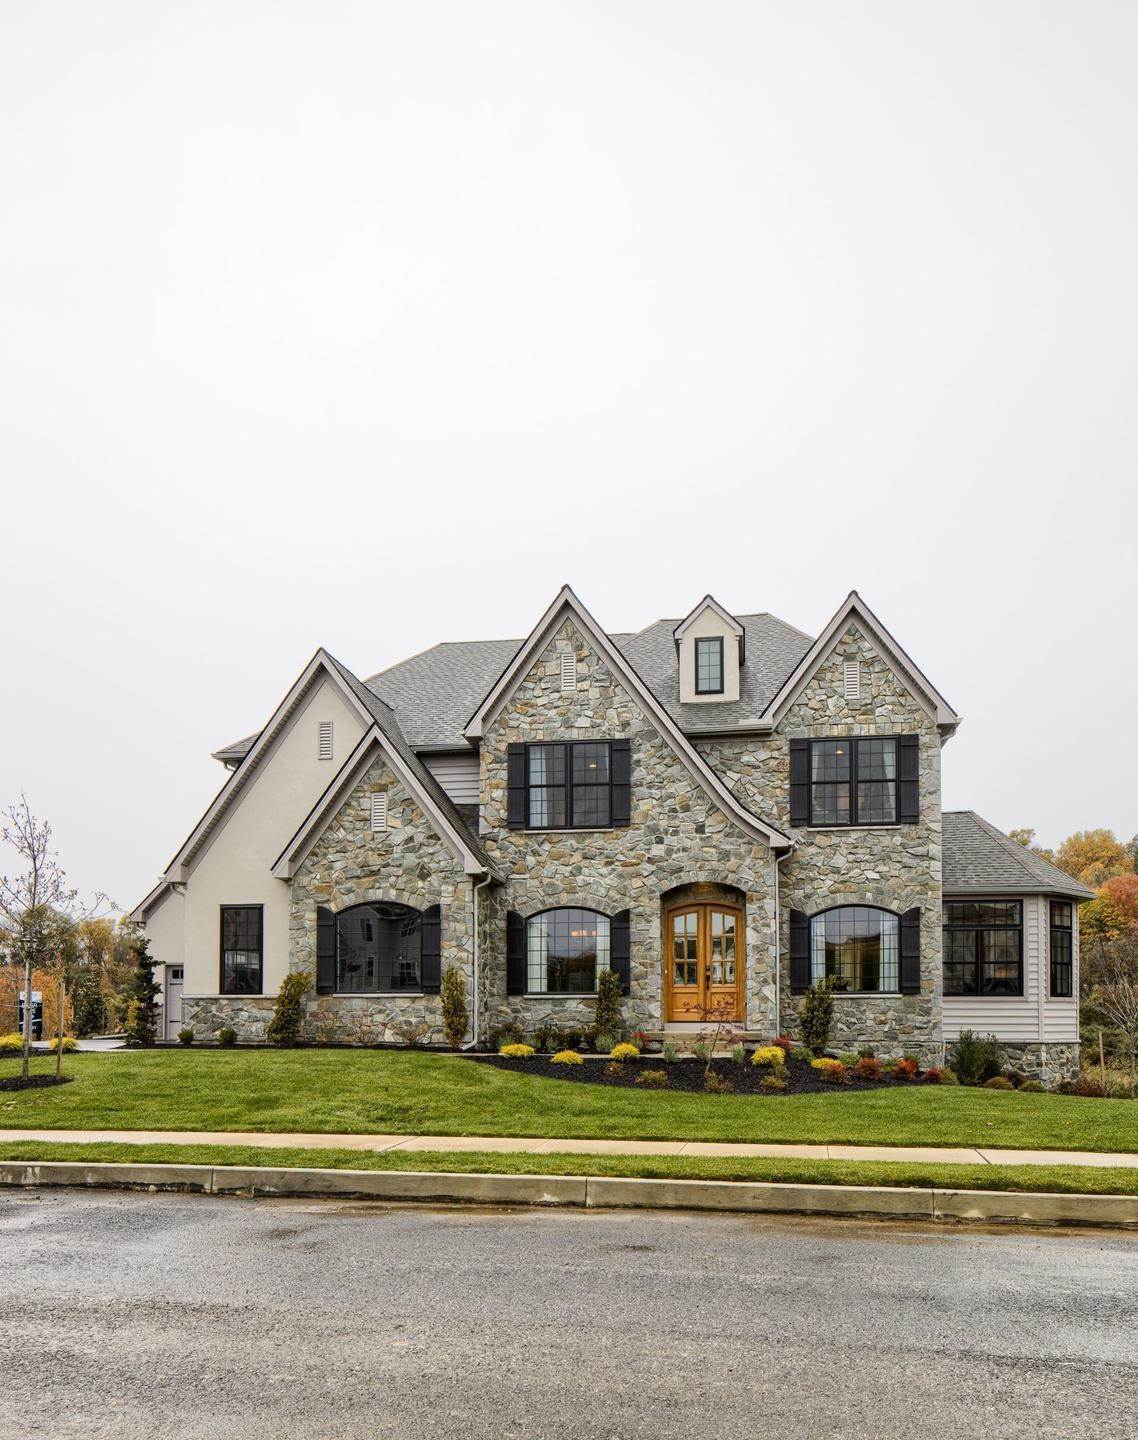 35. 101 Parkview Way, Newtown Square, PA 19073에 Ventry at Edgmont Preserve 건물